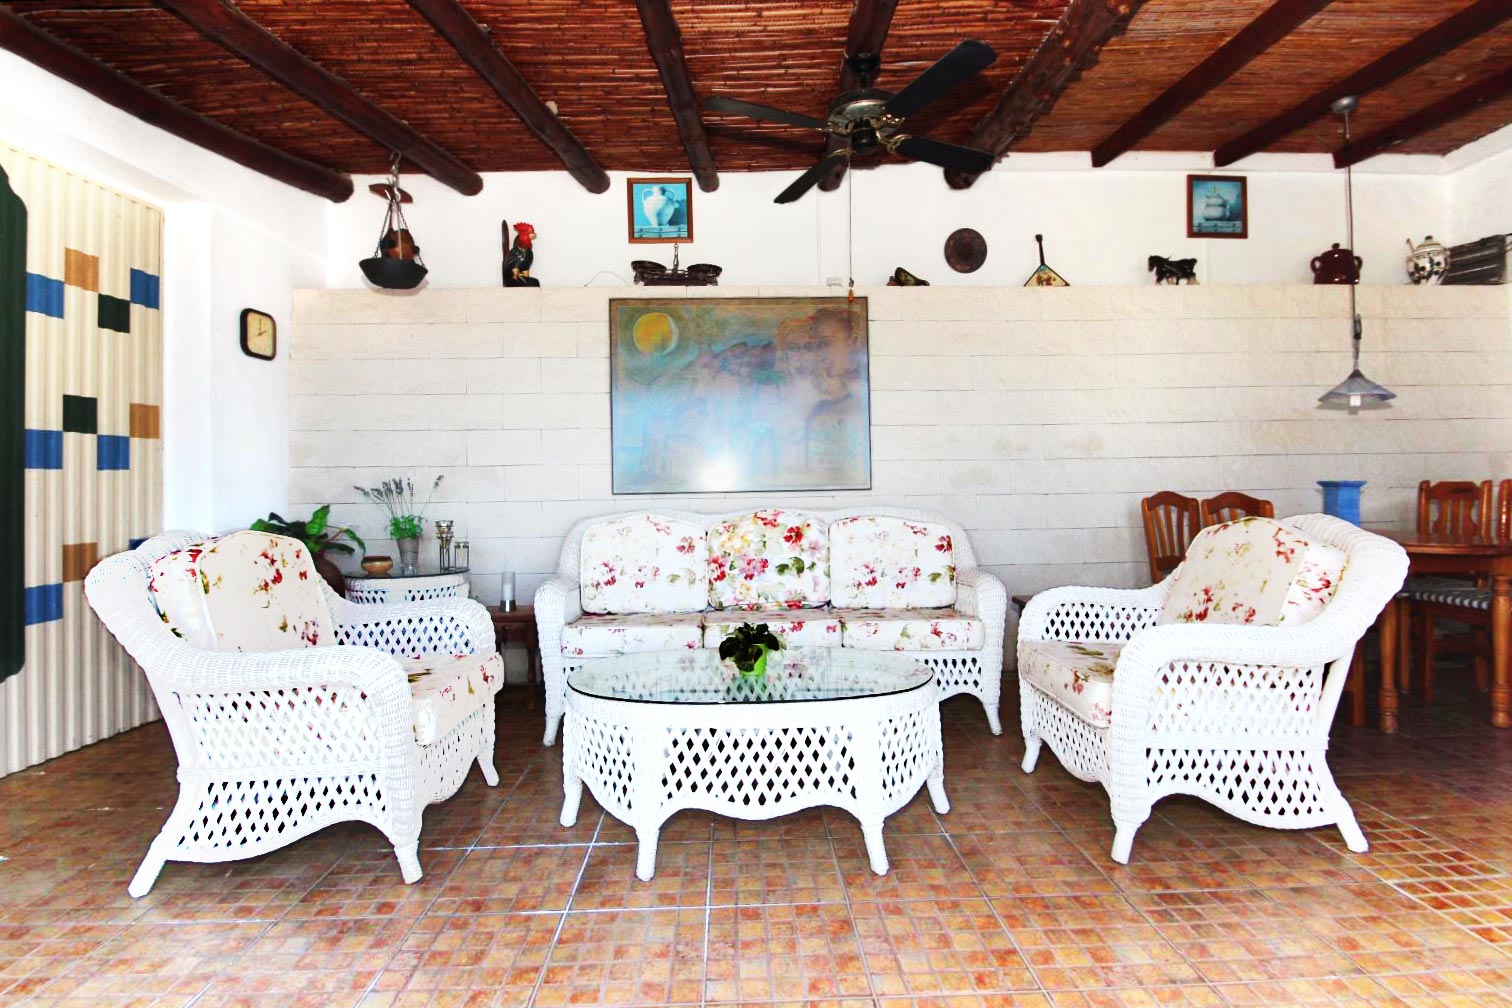 The terrace features also comfortable outdoor furniture.